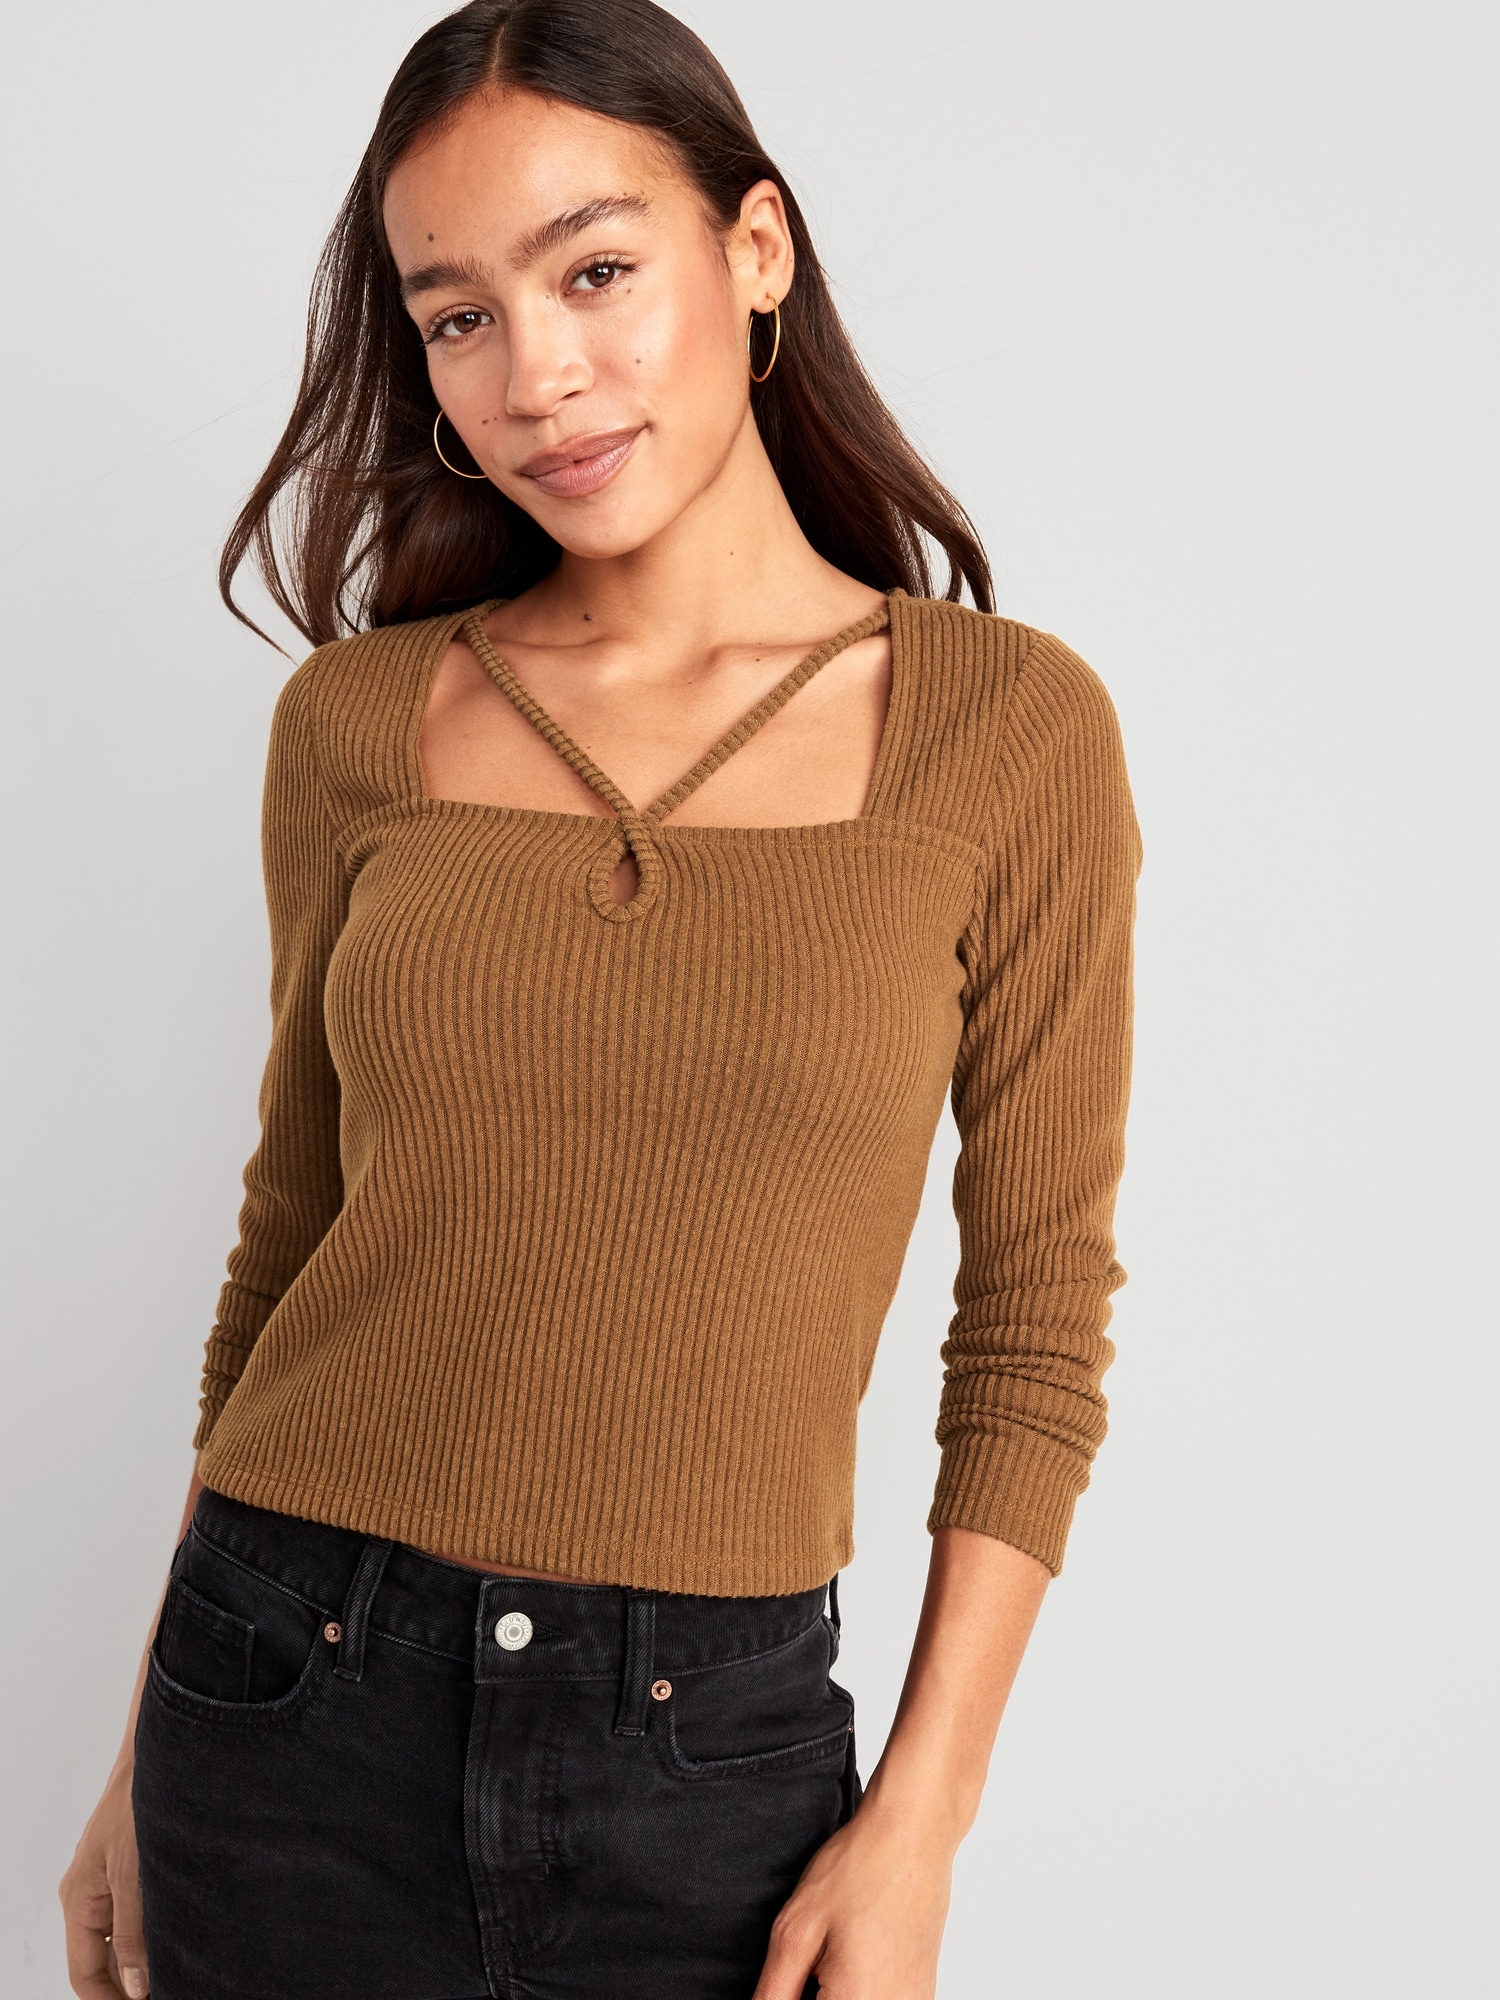 Fitted Long-Sleeve Strappy Keyhole Top